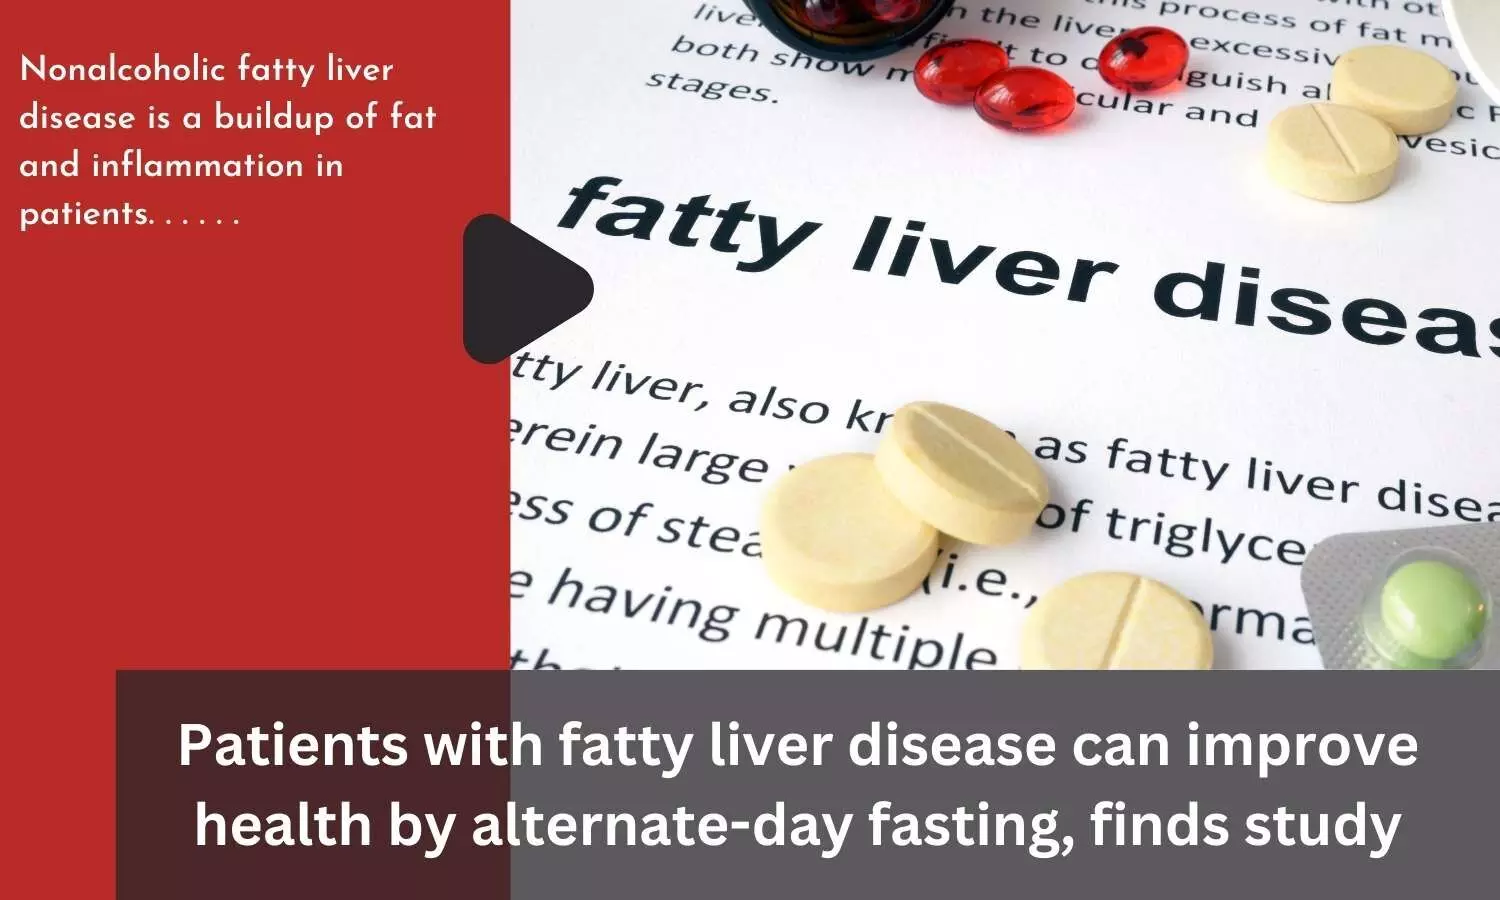 Patients with fatty liver disease can improve health by alternate-day fasting, finds study